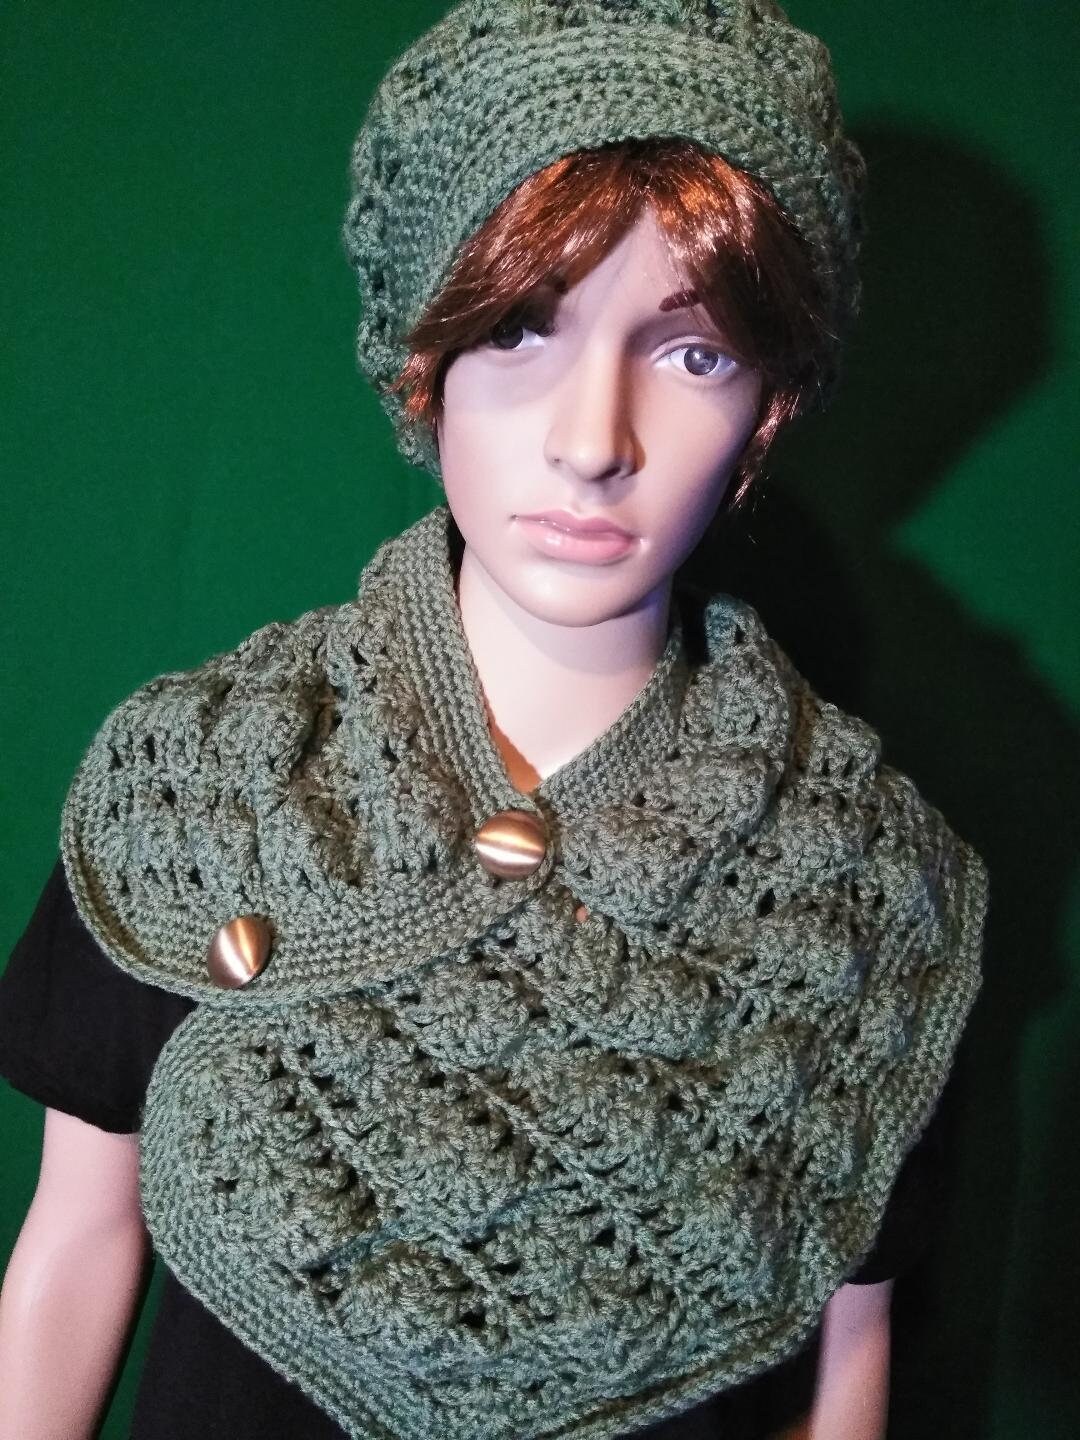 Crochet sage green hat and neck warmer